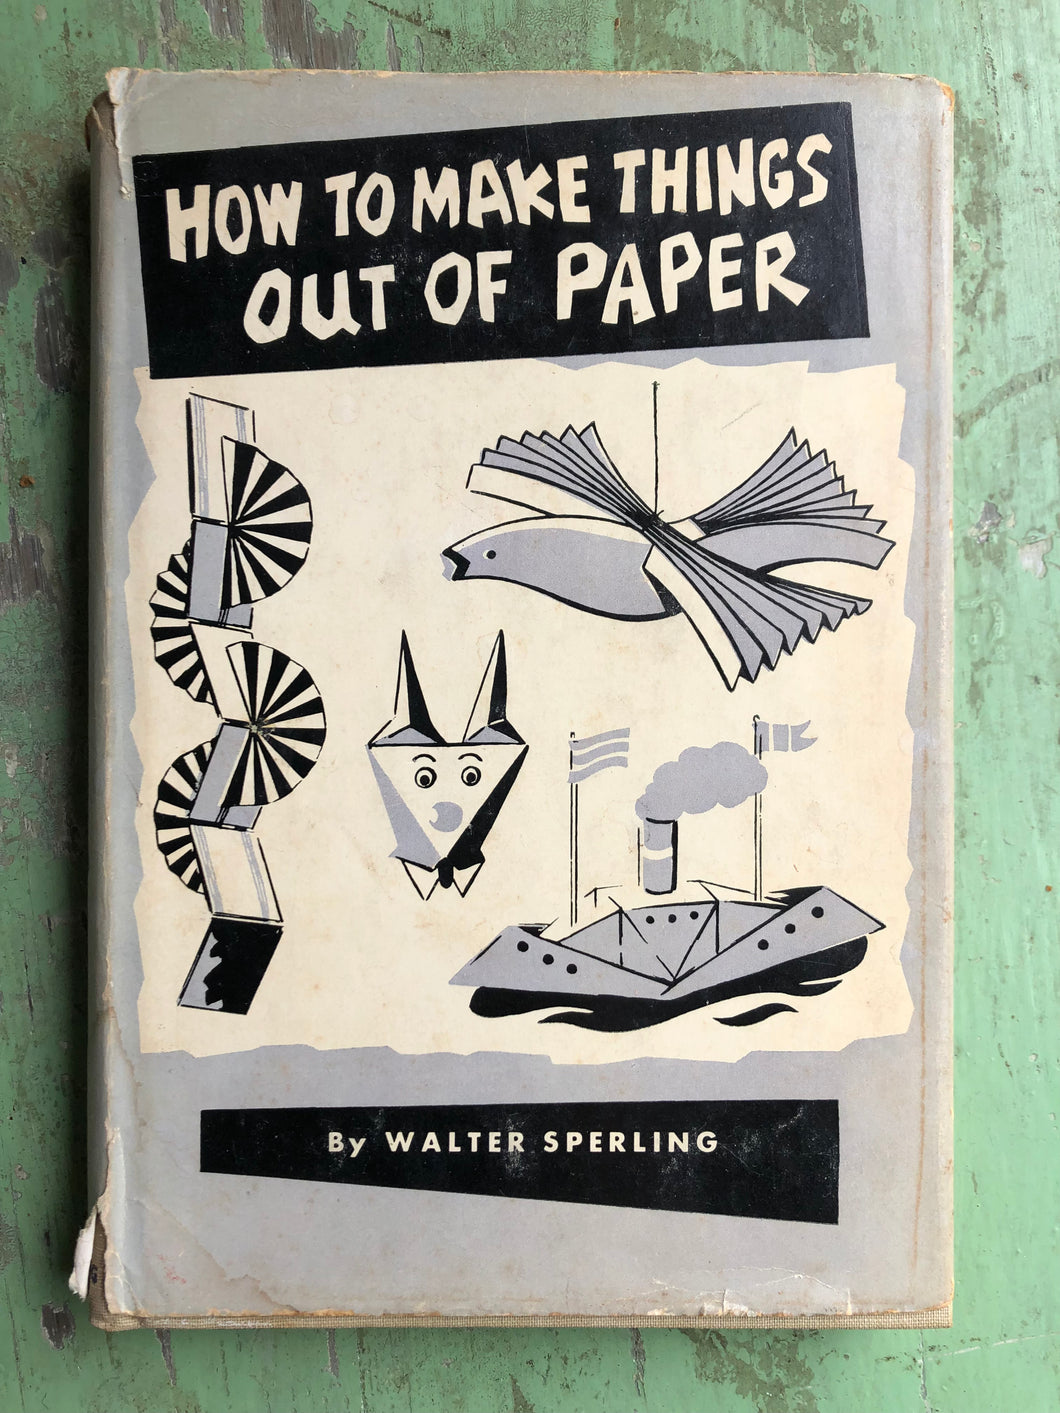 How to Make Things Out of Paper. by Walter Sperling